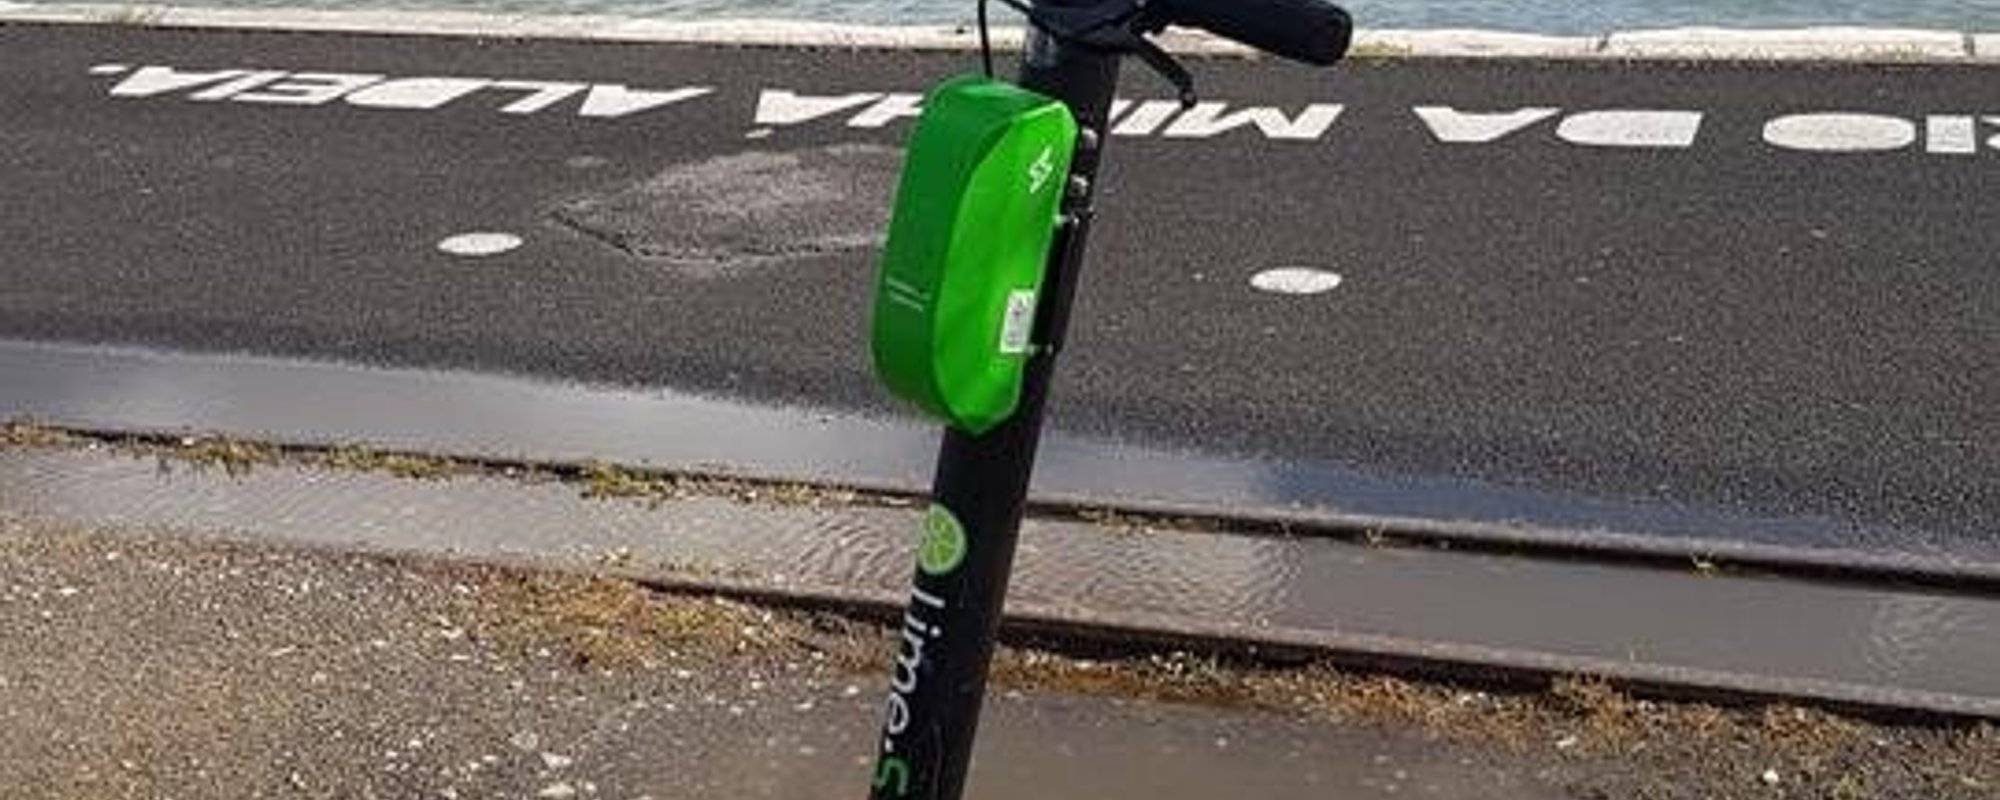 Alternative forms of transportation: The Lime electrical scooter